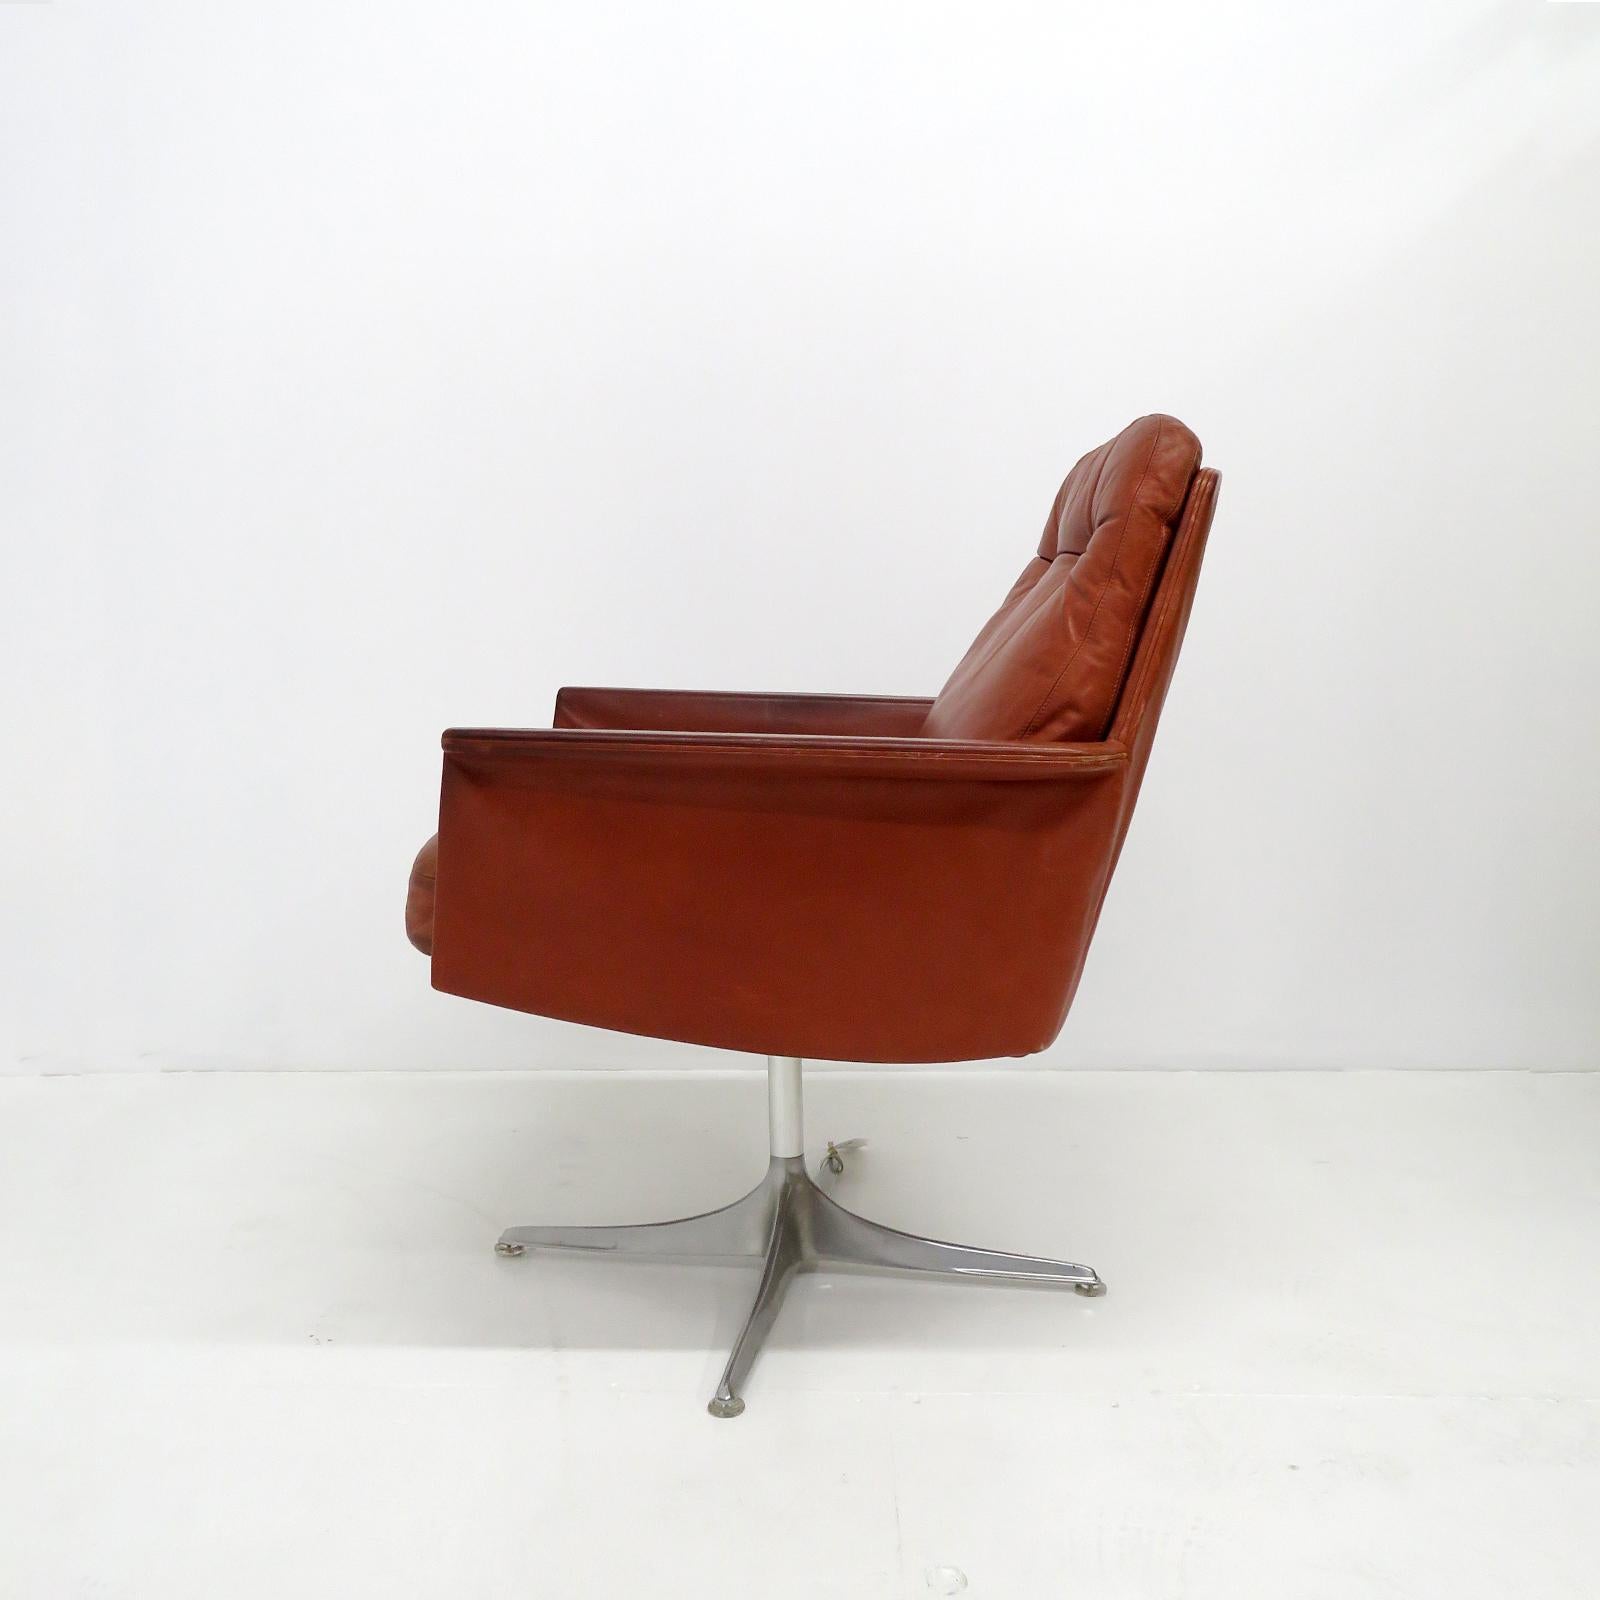 Brushed Pair of Horst Brüning Sedia Lounge Chairs for Kill International, 1960s For Sale